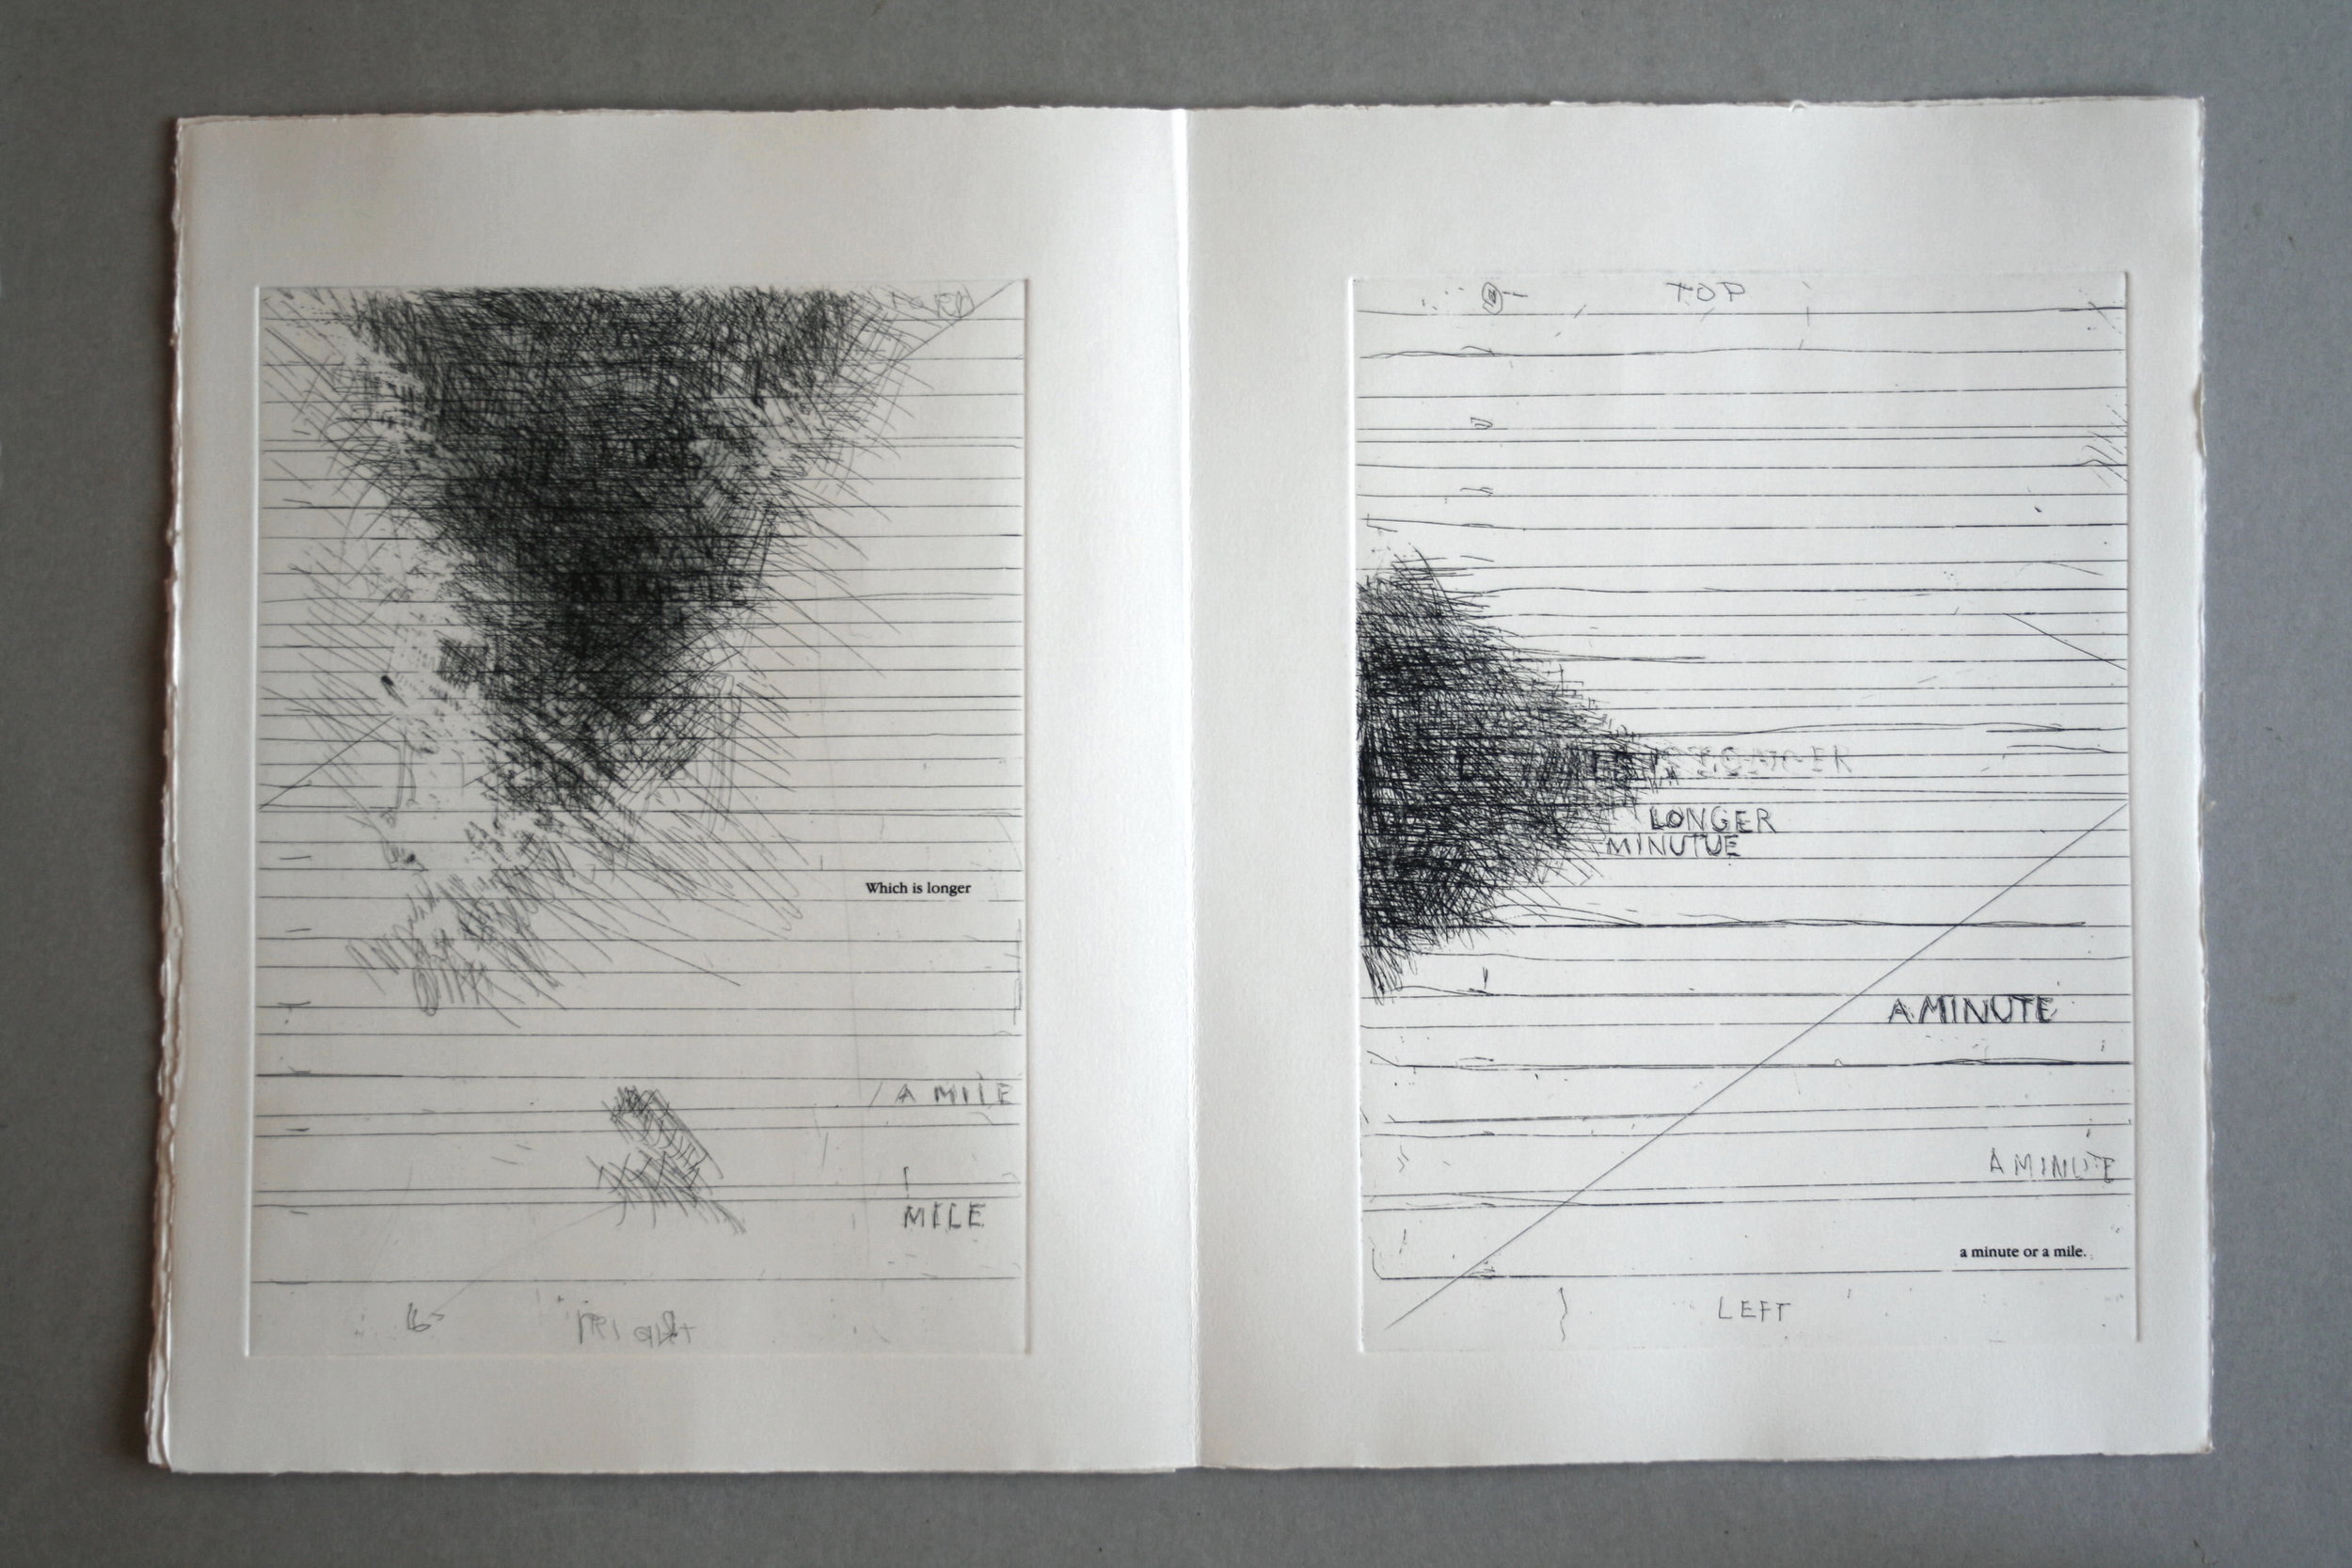   MEMORY Seventeen etchings by PAT STEIR Unpublished texts of I.P. SUKONECK , 2015 Artist Book 16 x 11 x 1/2 inches (40.6 x 27.9 x 1.3 cm) Wood case: 17 1/8 x 11 3/4 x 1 1/2 inches (43.5 x 29.8 x 3.8 cm) Edition : 44/50 Edizioni Canopo Edition of 50.